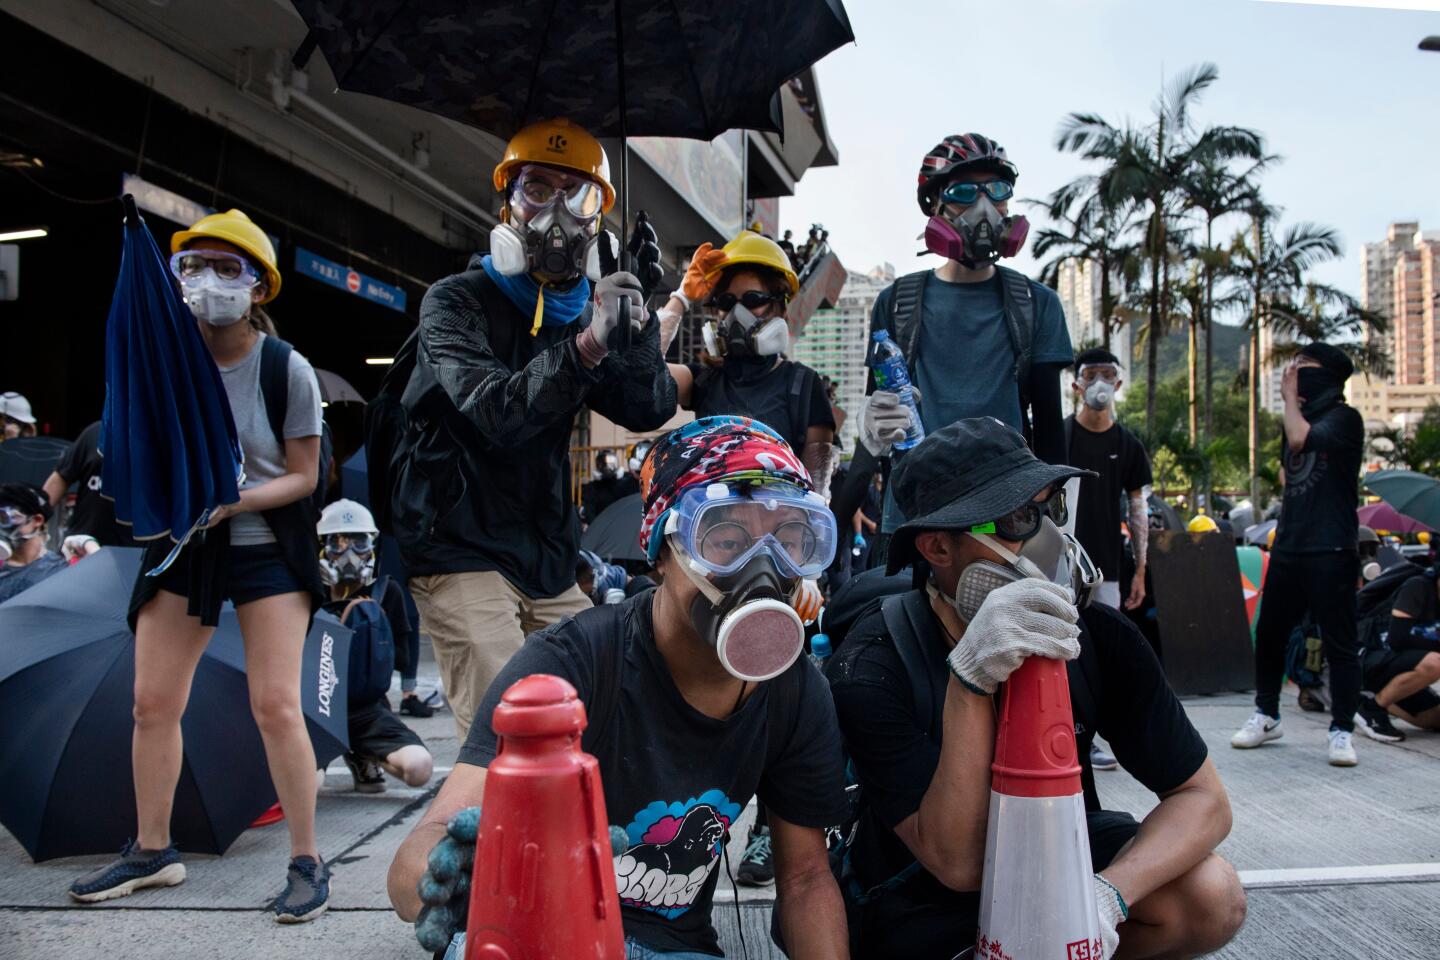 Unrest and chaos in Hong Kong